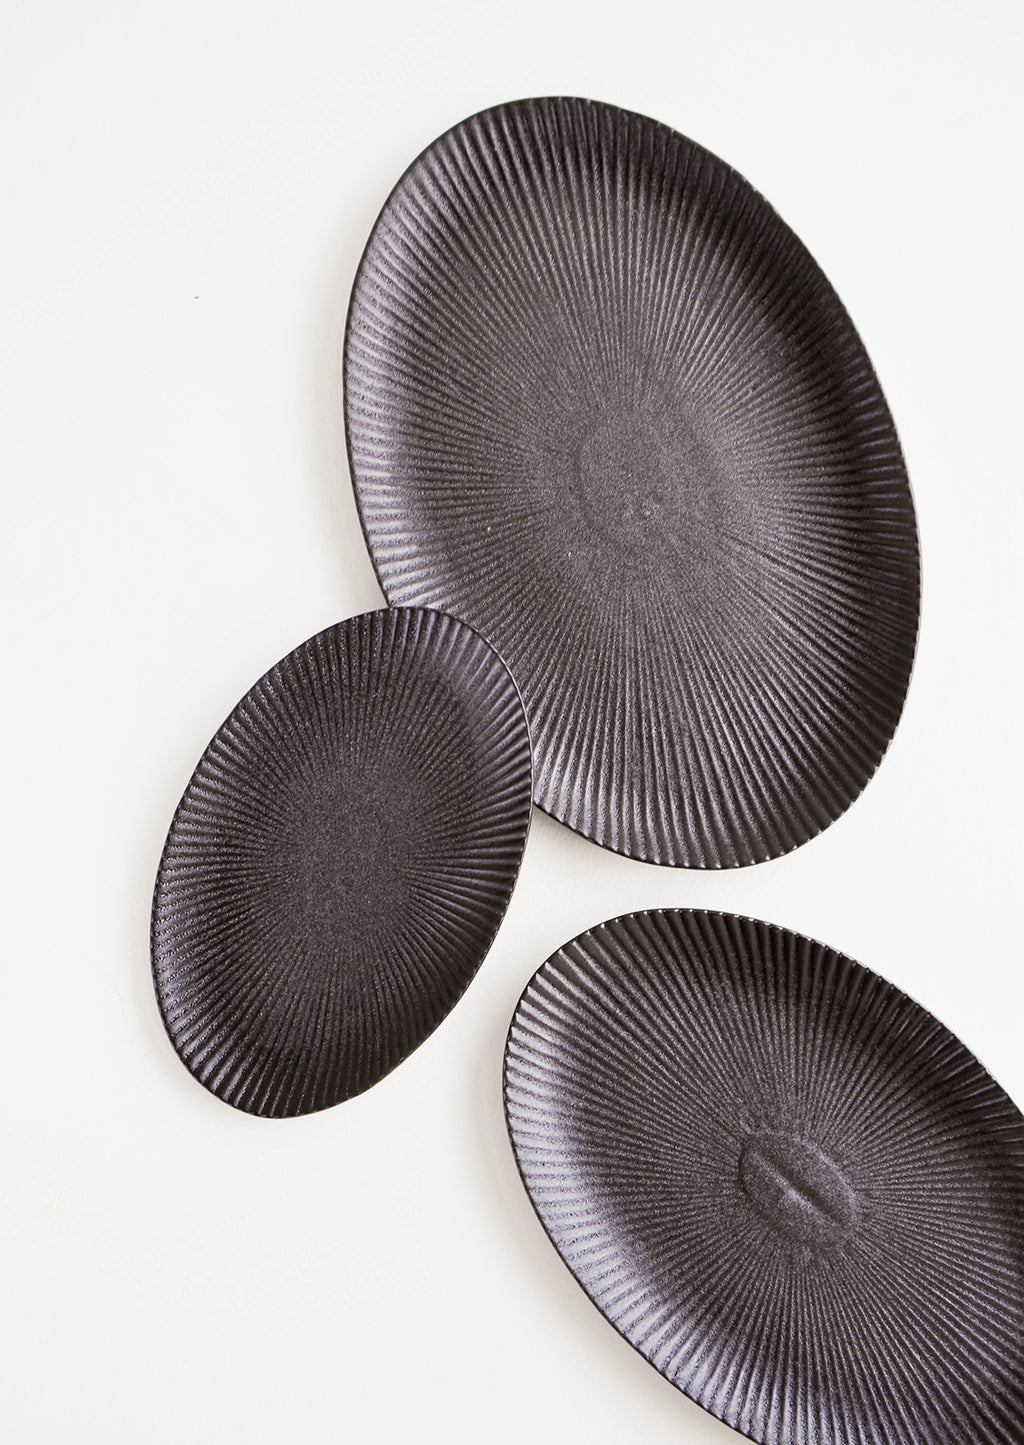 1: Oval-shaped, black ceramic trays with radiating lines pattern in a mix of incremental sizes